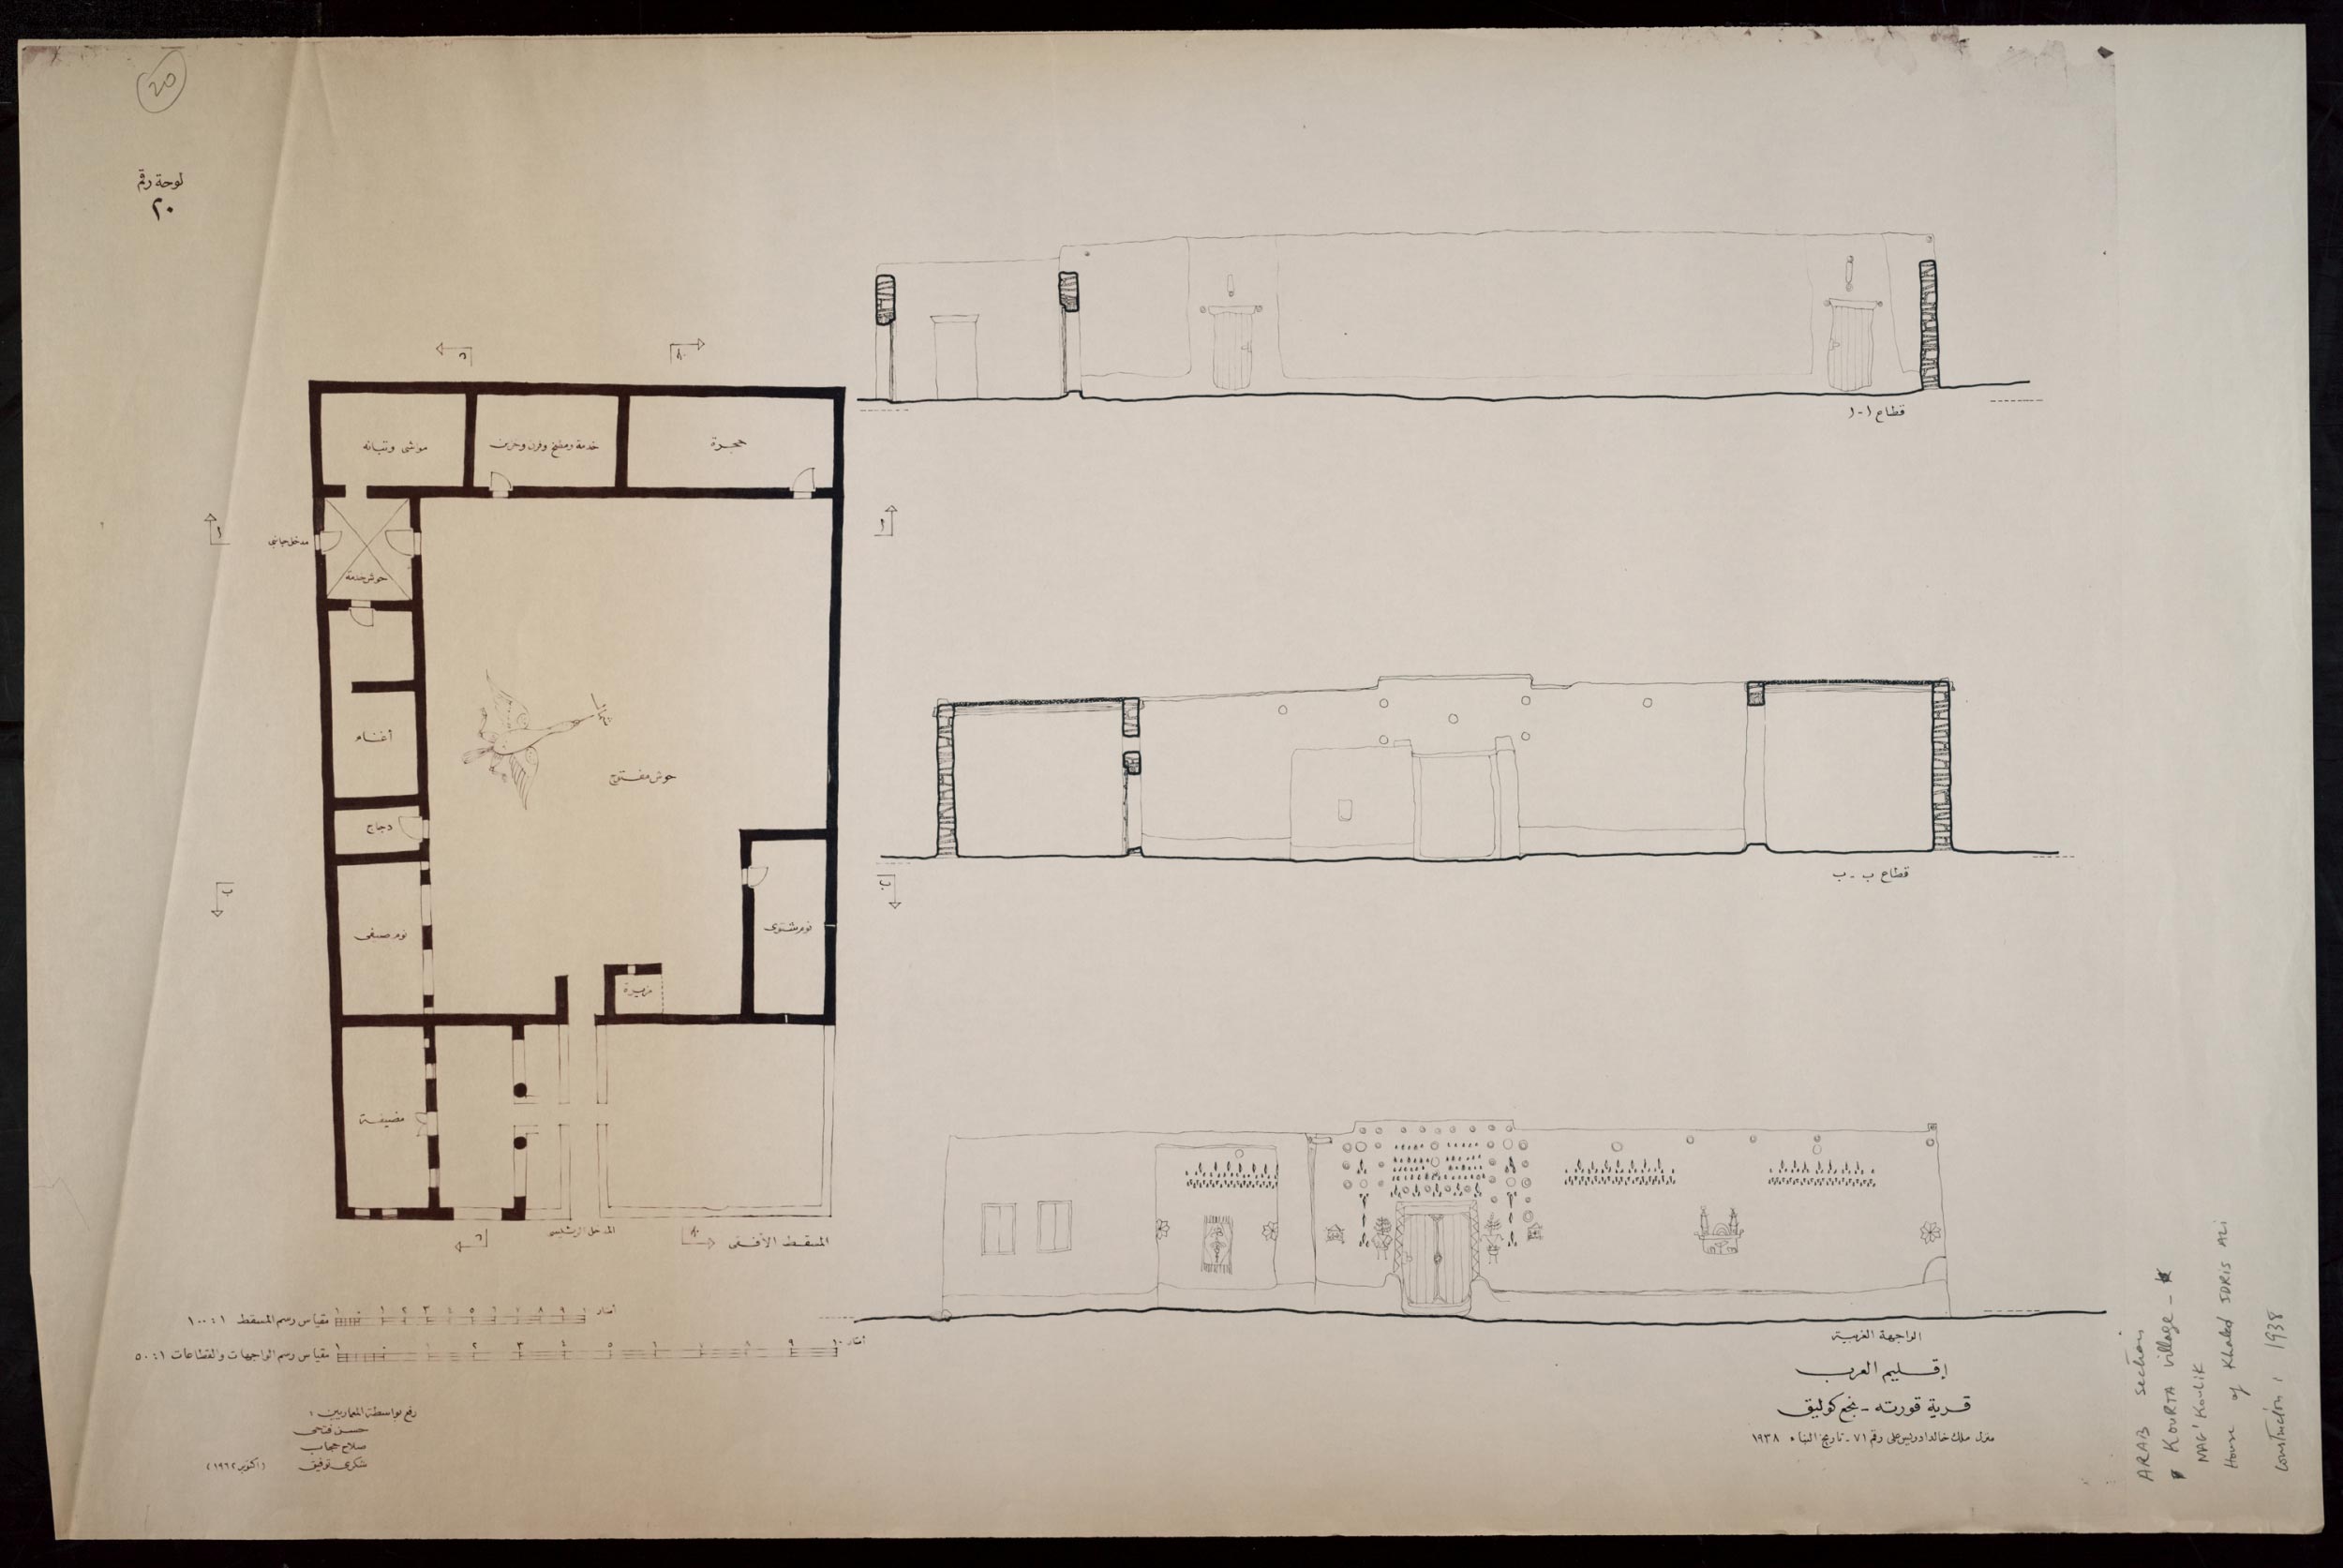 Floor plans, west elevational drawing, and sections.